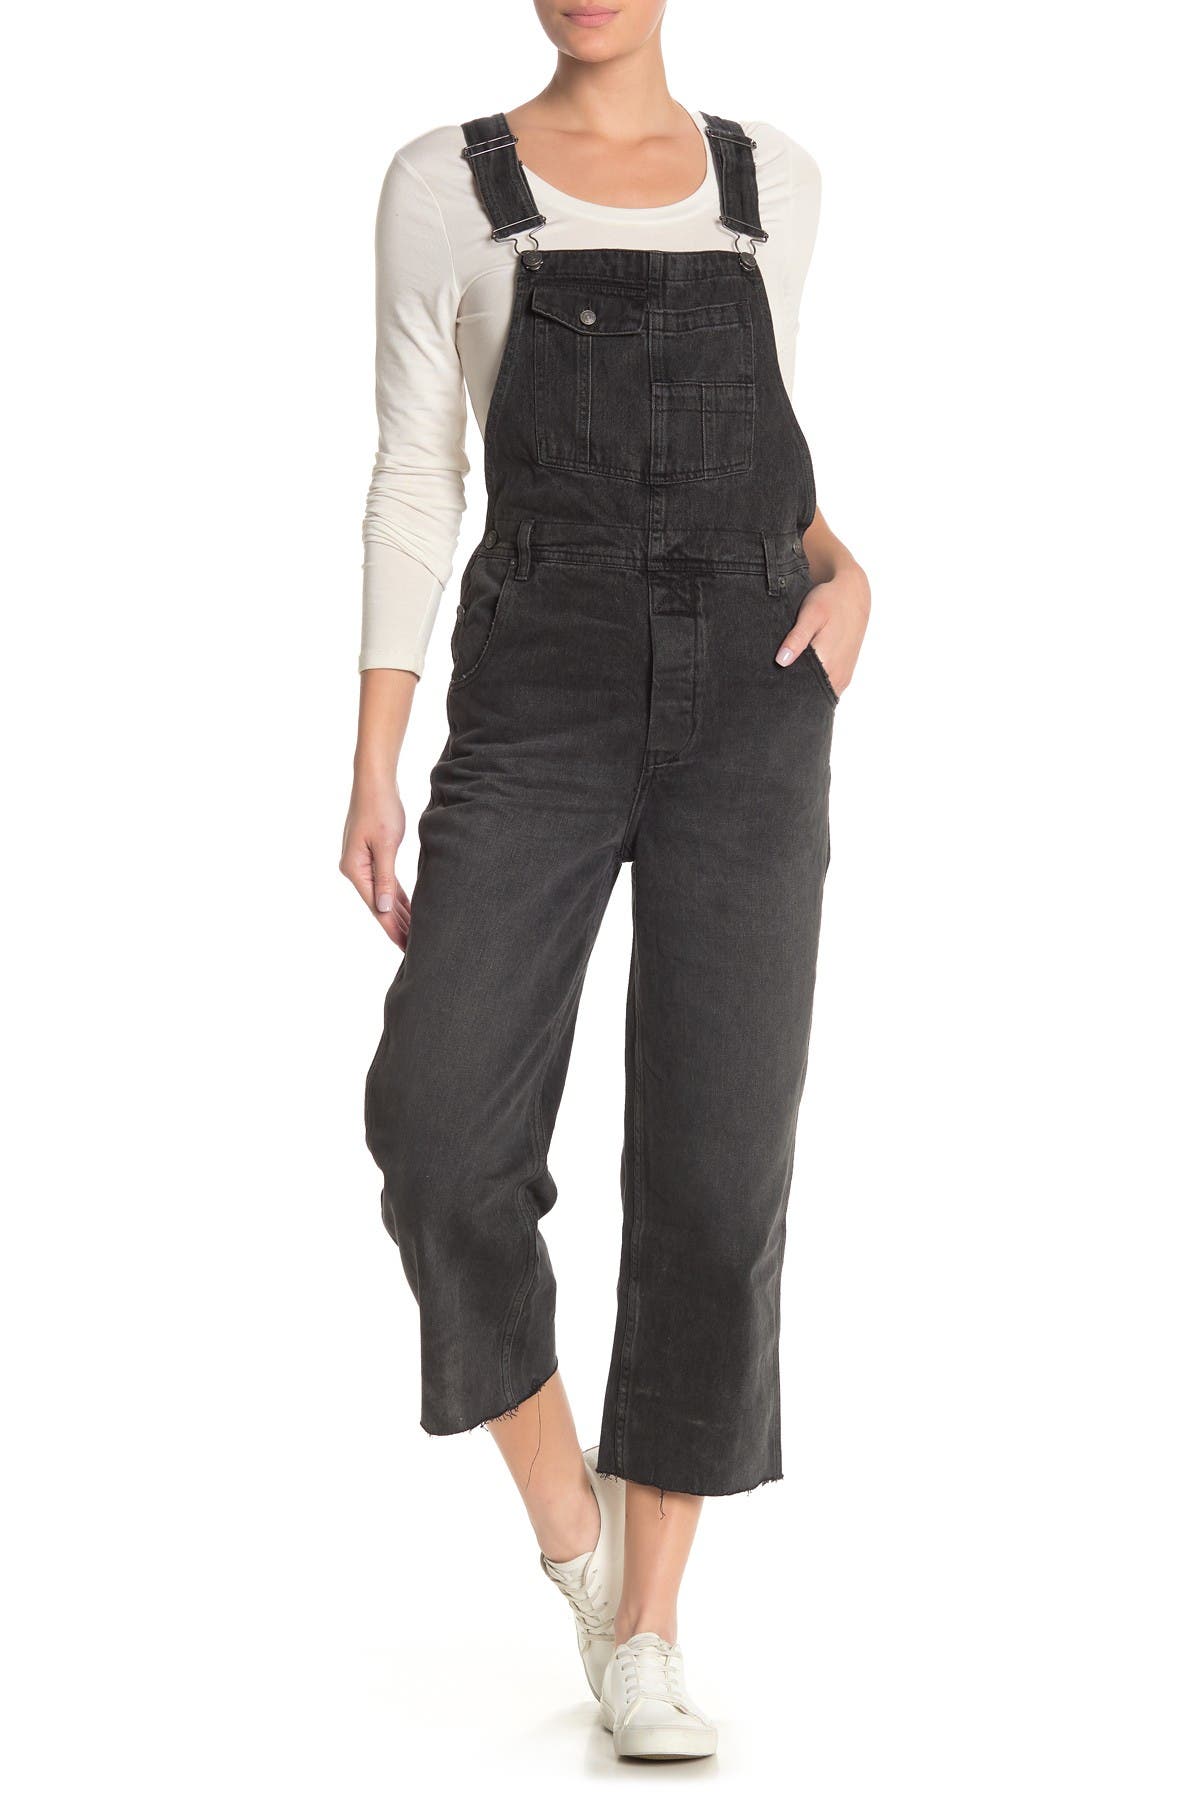 free people baggy overalls